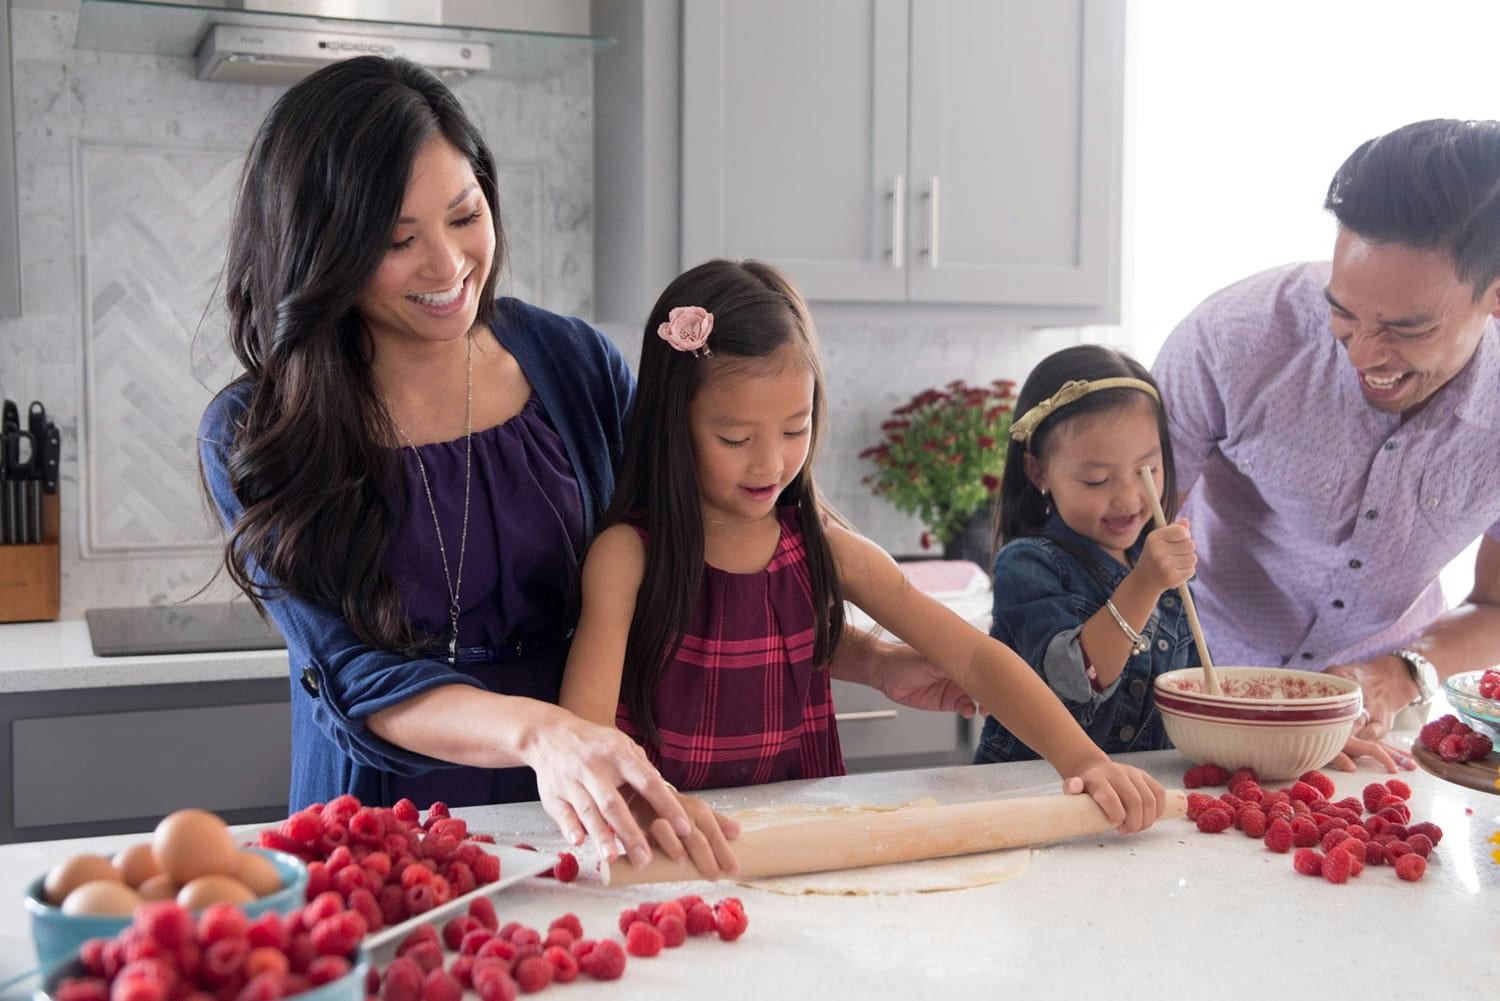 Baking with Your Family: A Time to Connect